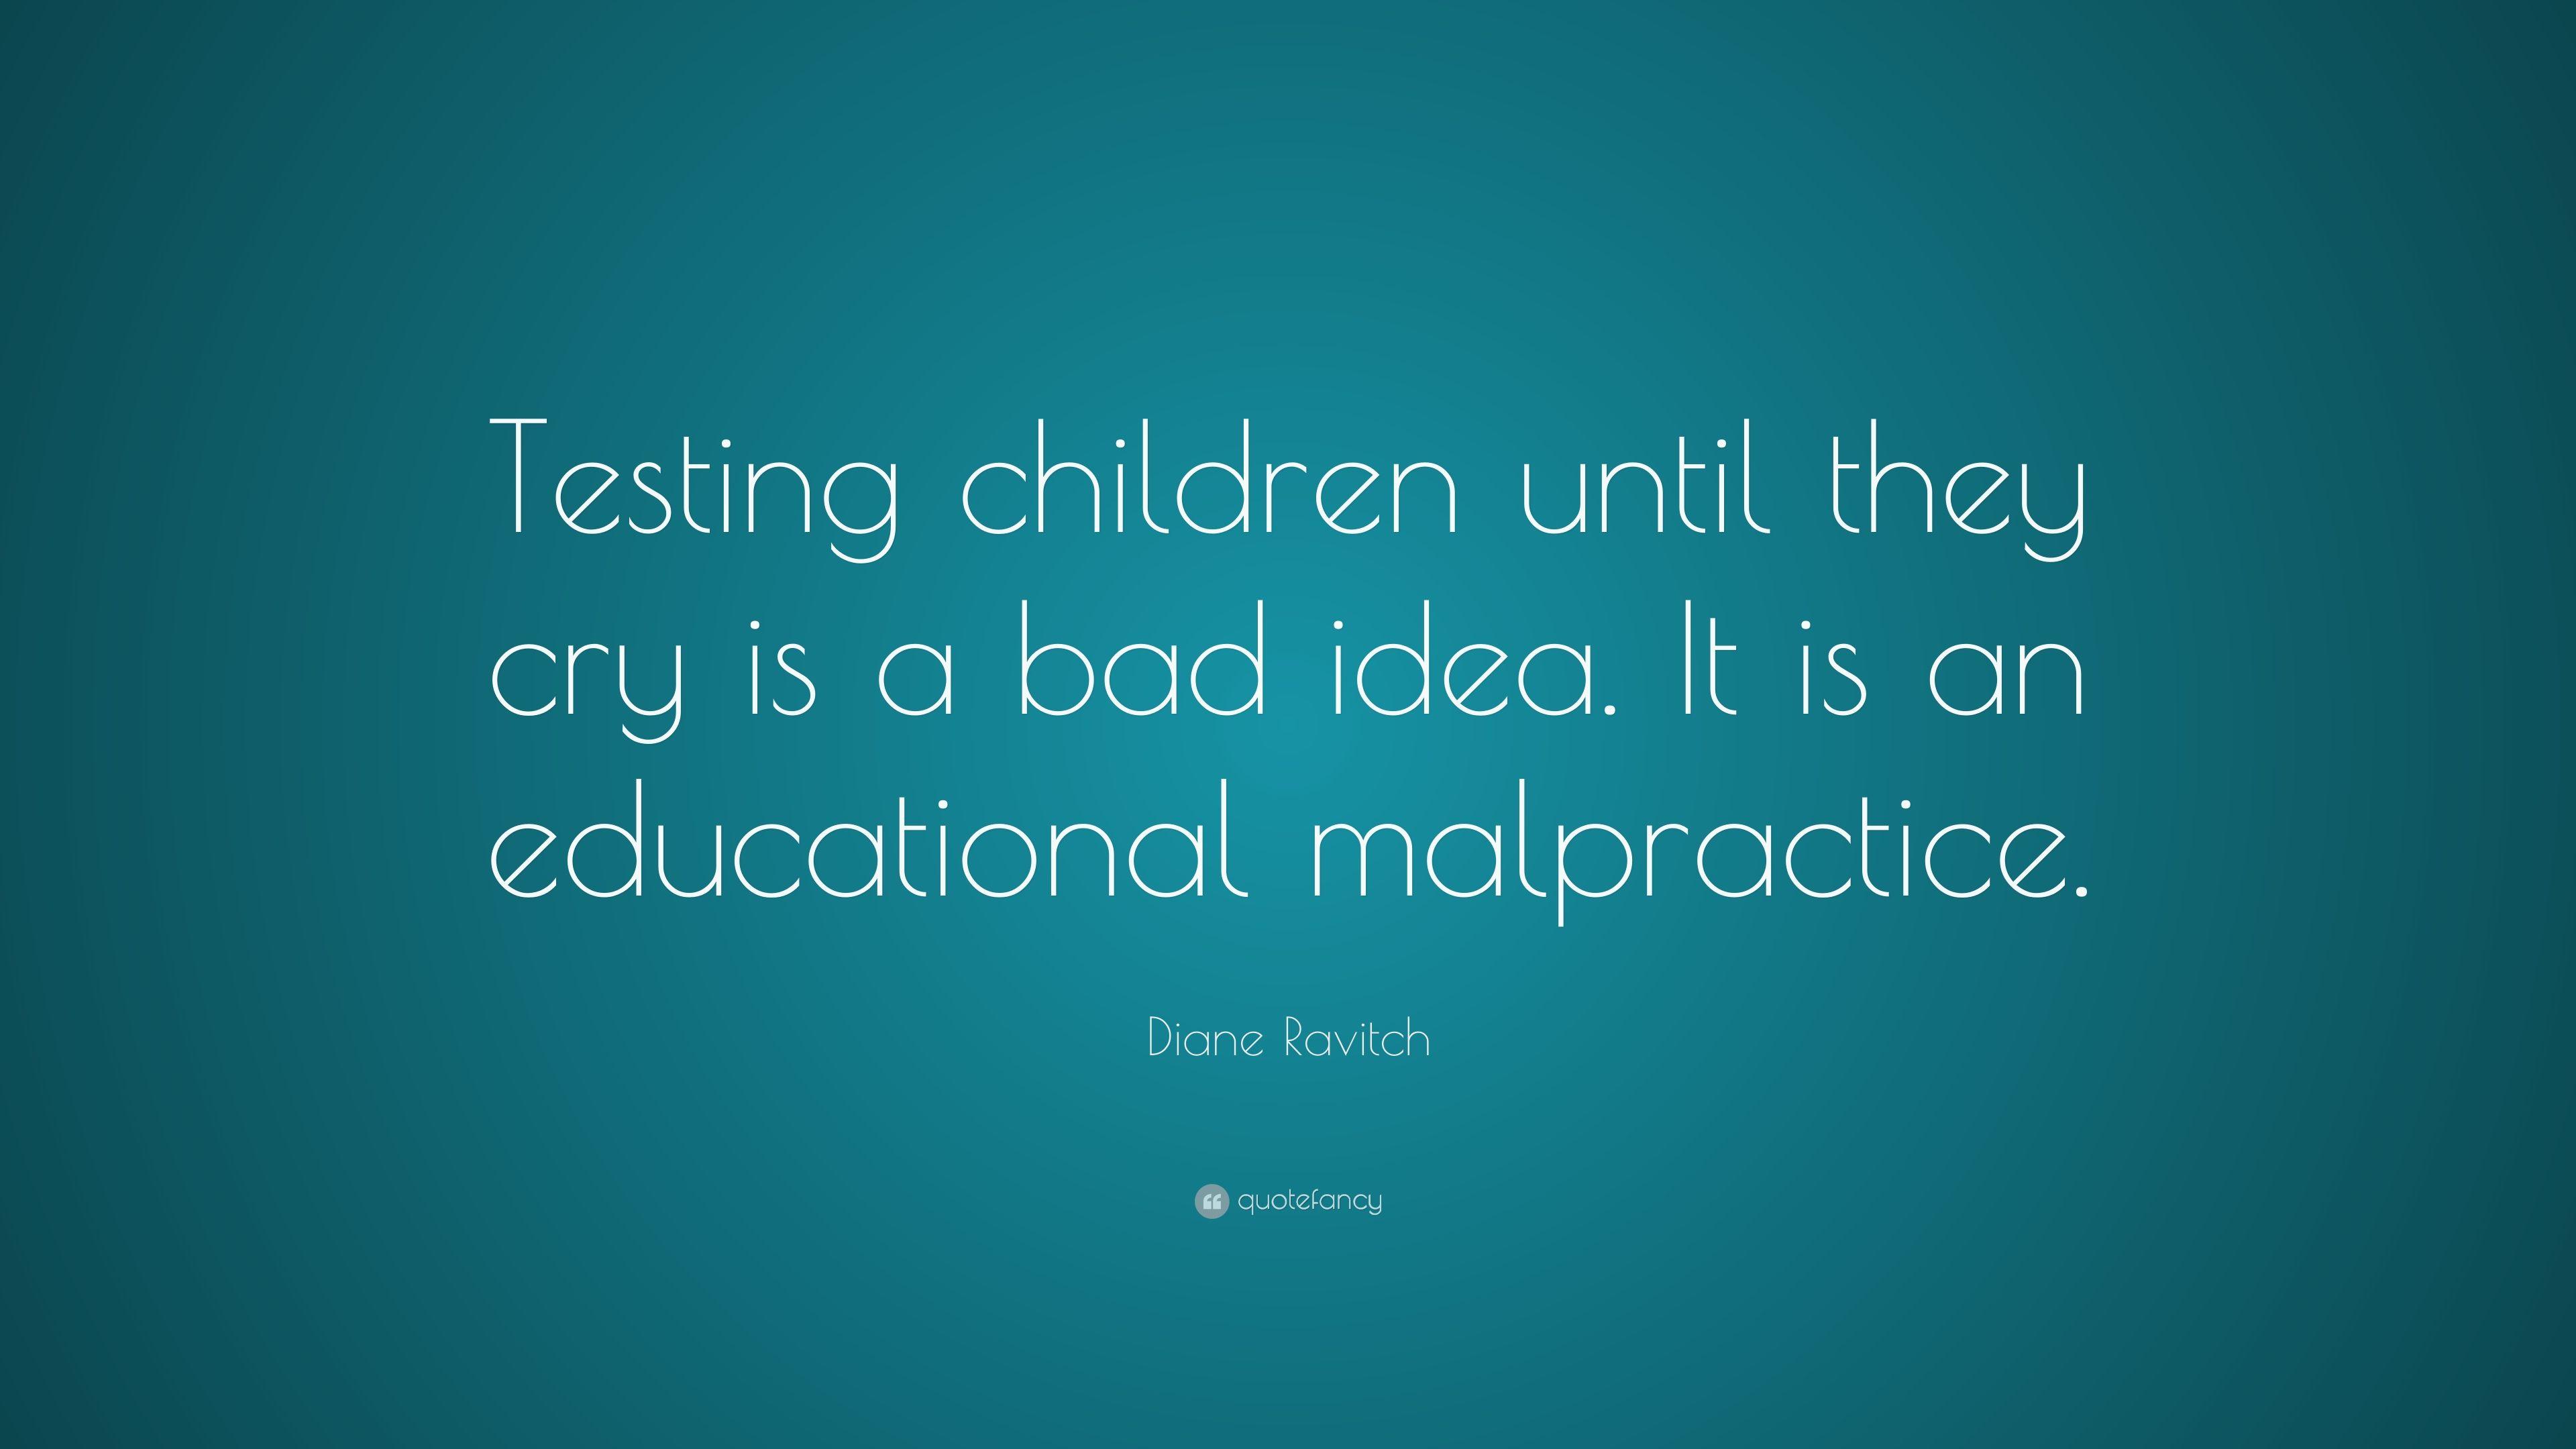 Diane Ravitch Quote: “Testing children until they cry is a bad idea